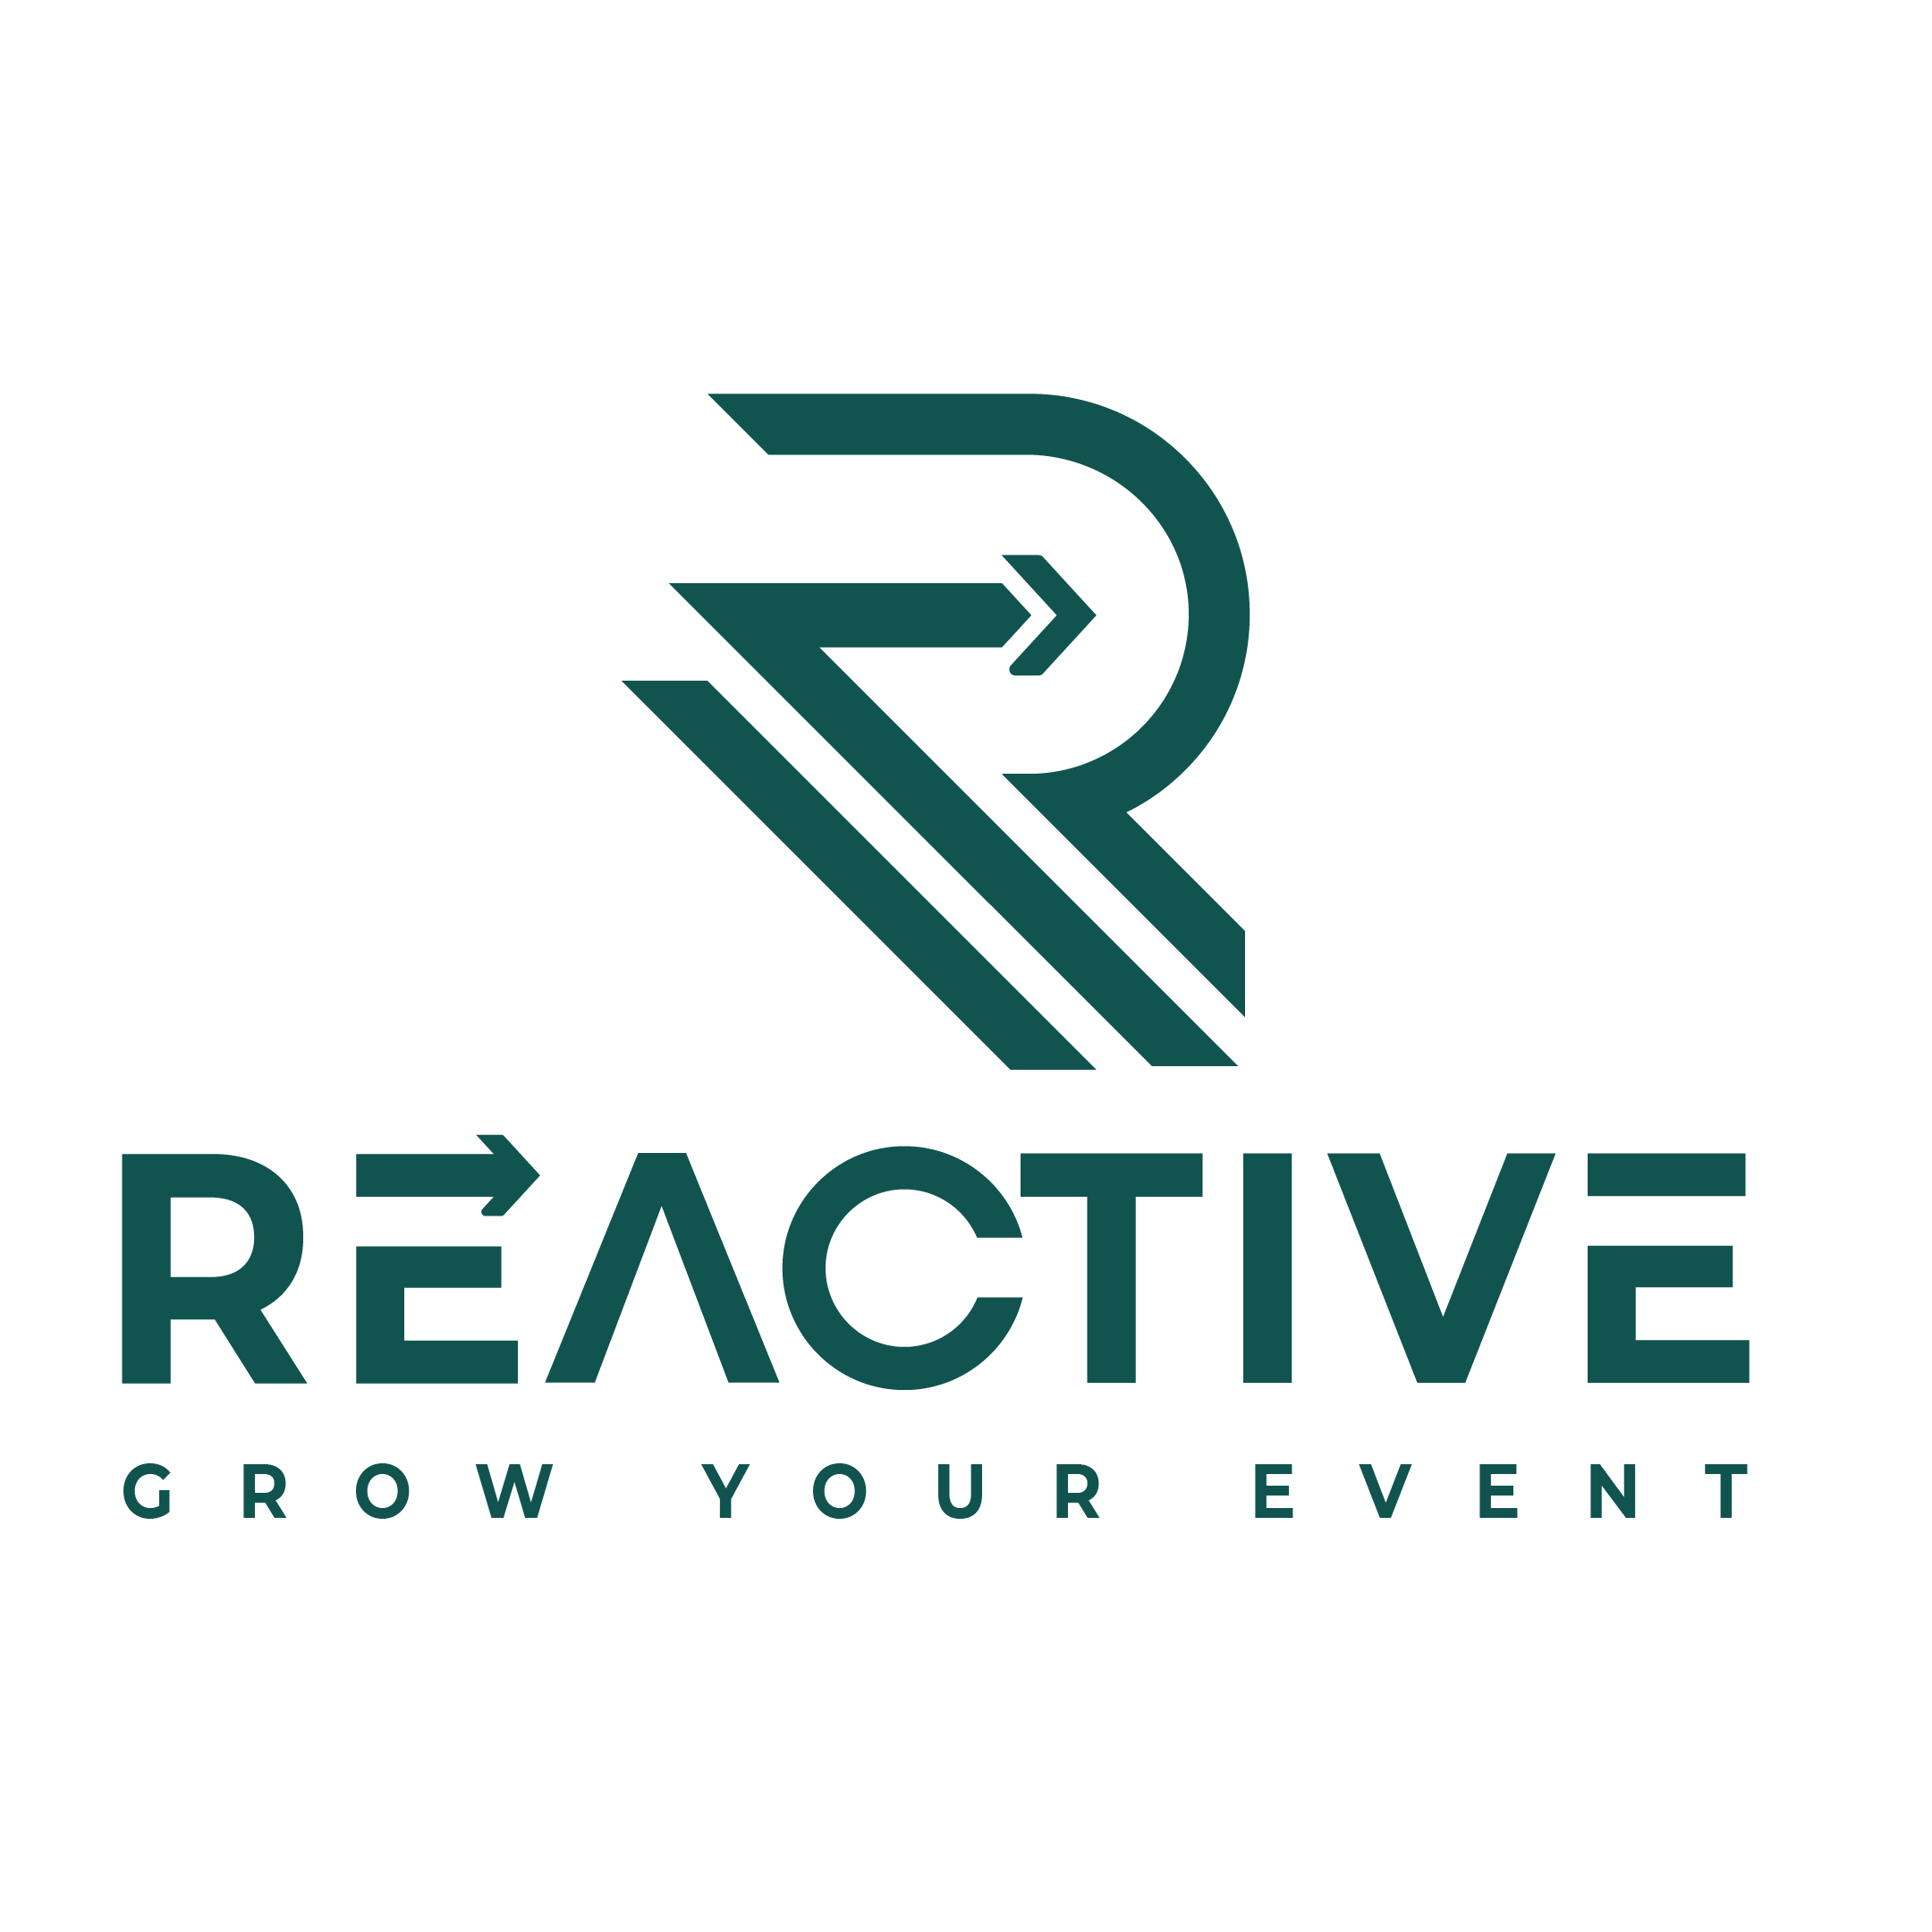 Links by Reactive